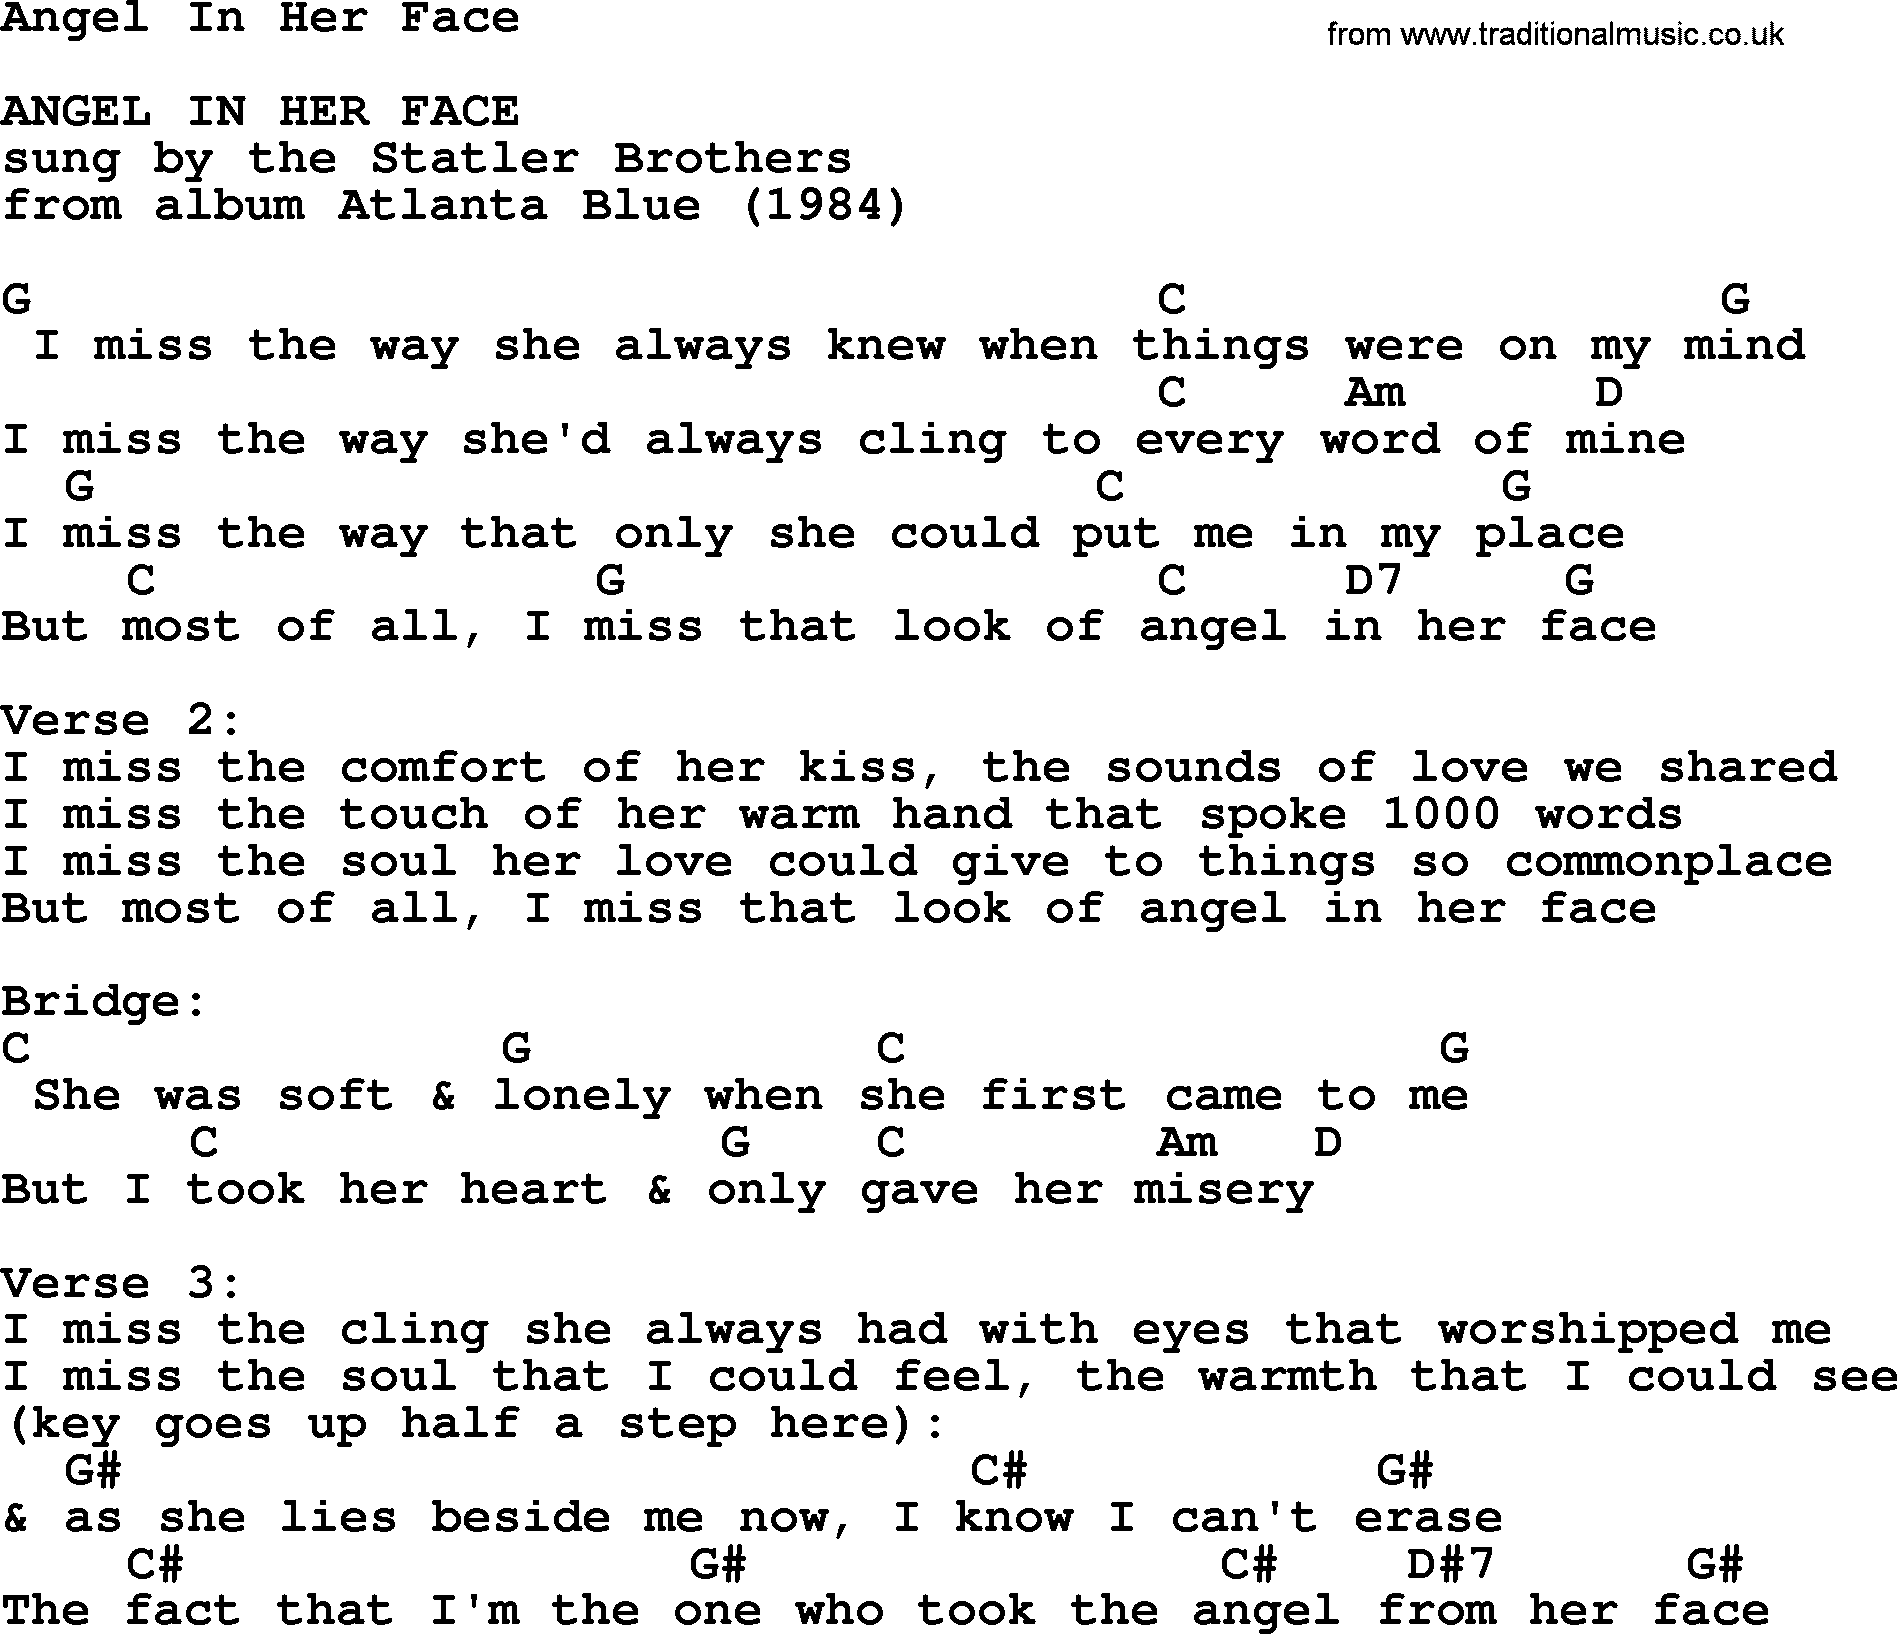 Bluegrass song: Angel In Her Face, lyrics and chords